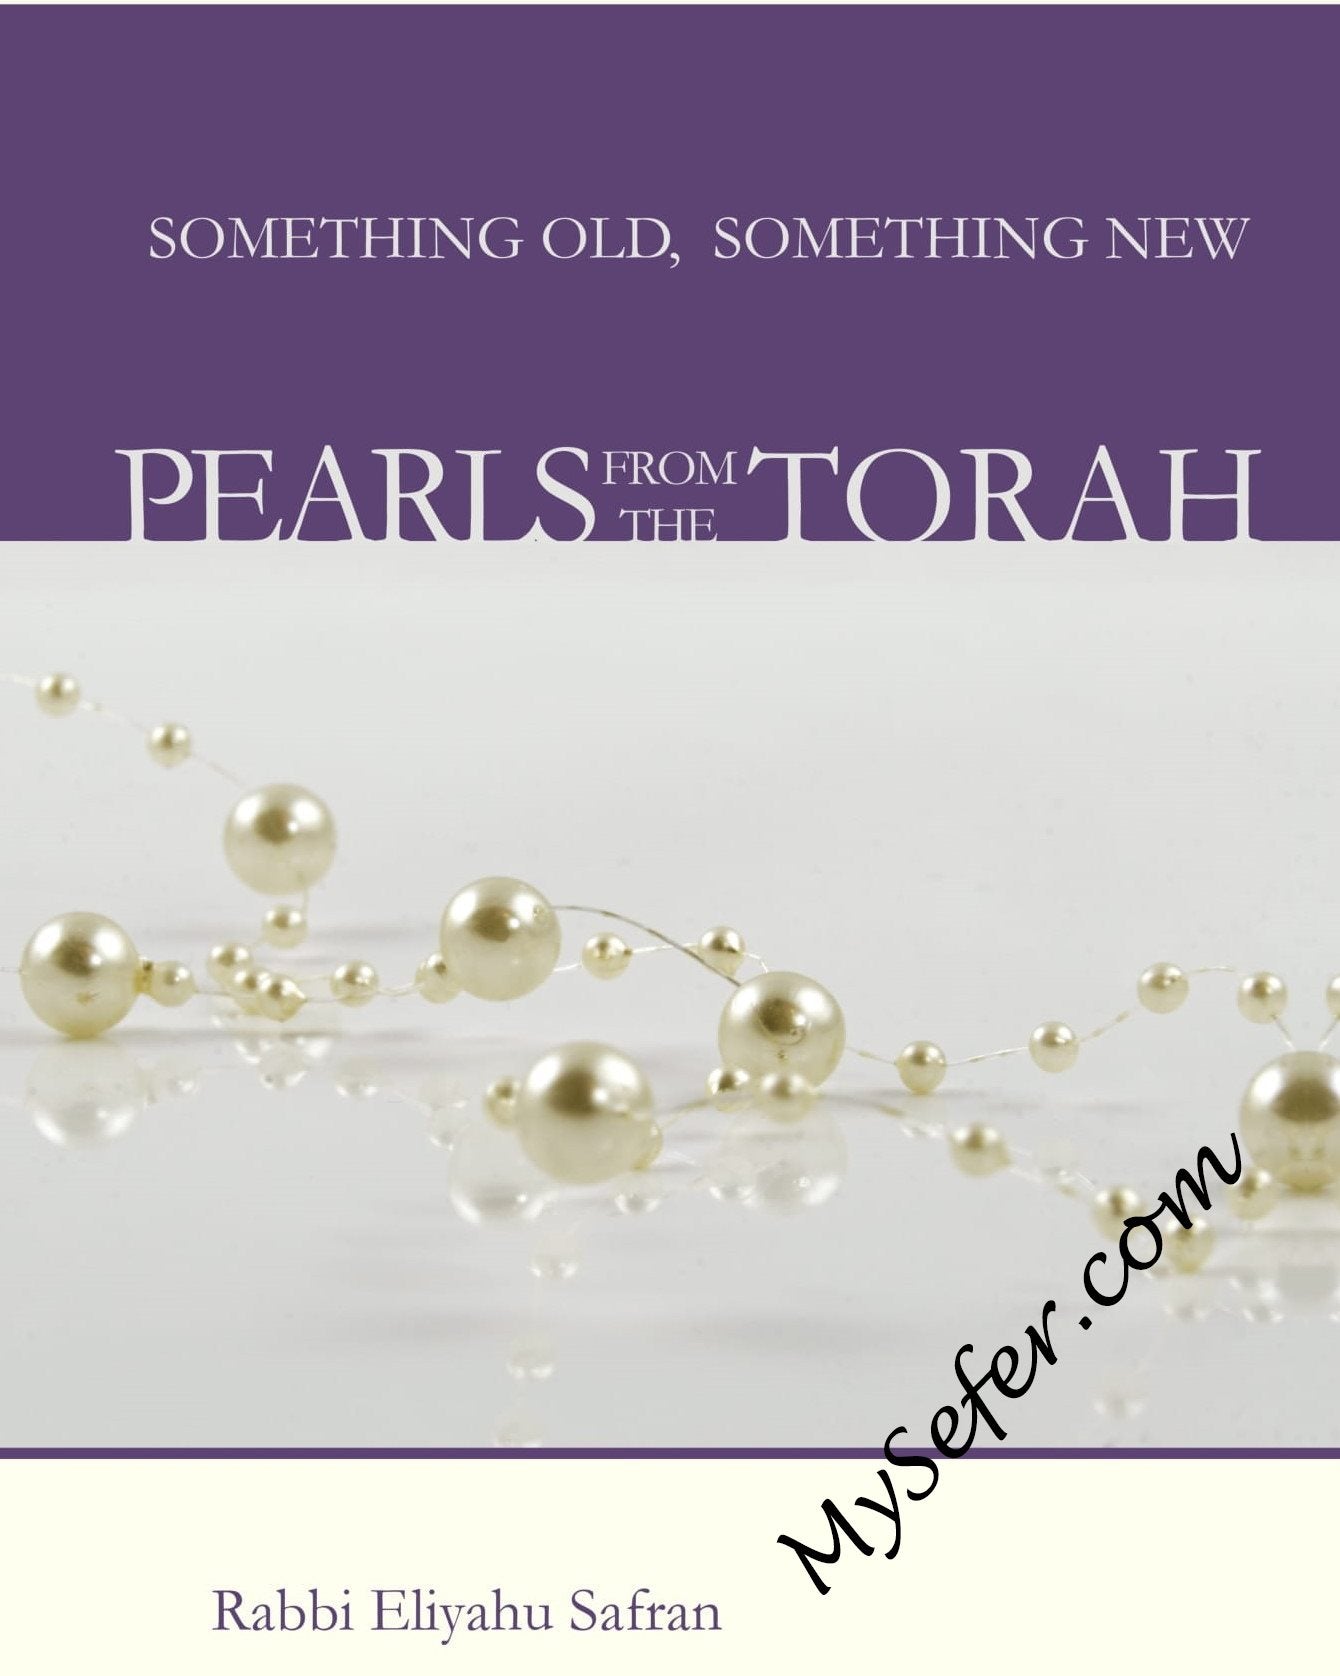 Something Old, Something New. Pearls from the Torah